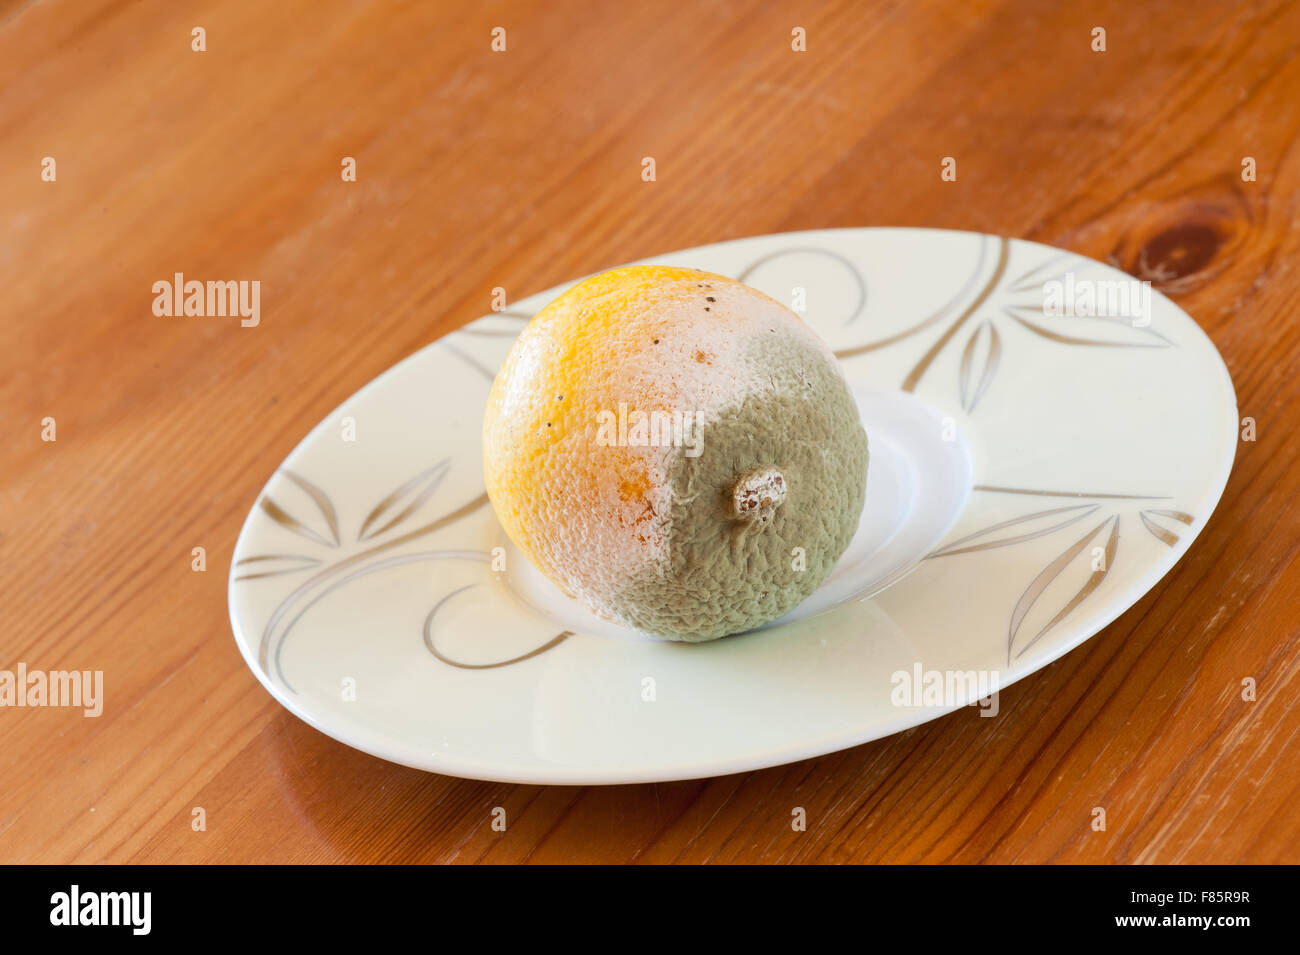 Mouldy yellow lemon fruit lying on small plate on wooden table, moldy and decayed bad food wastage, one lemon garbage horizontal Stock Photo